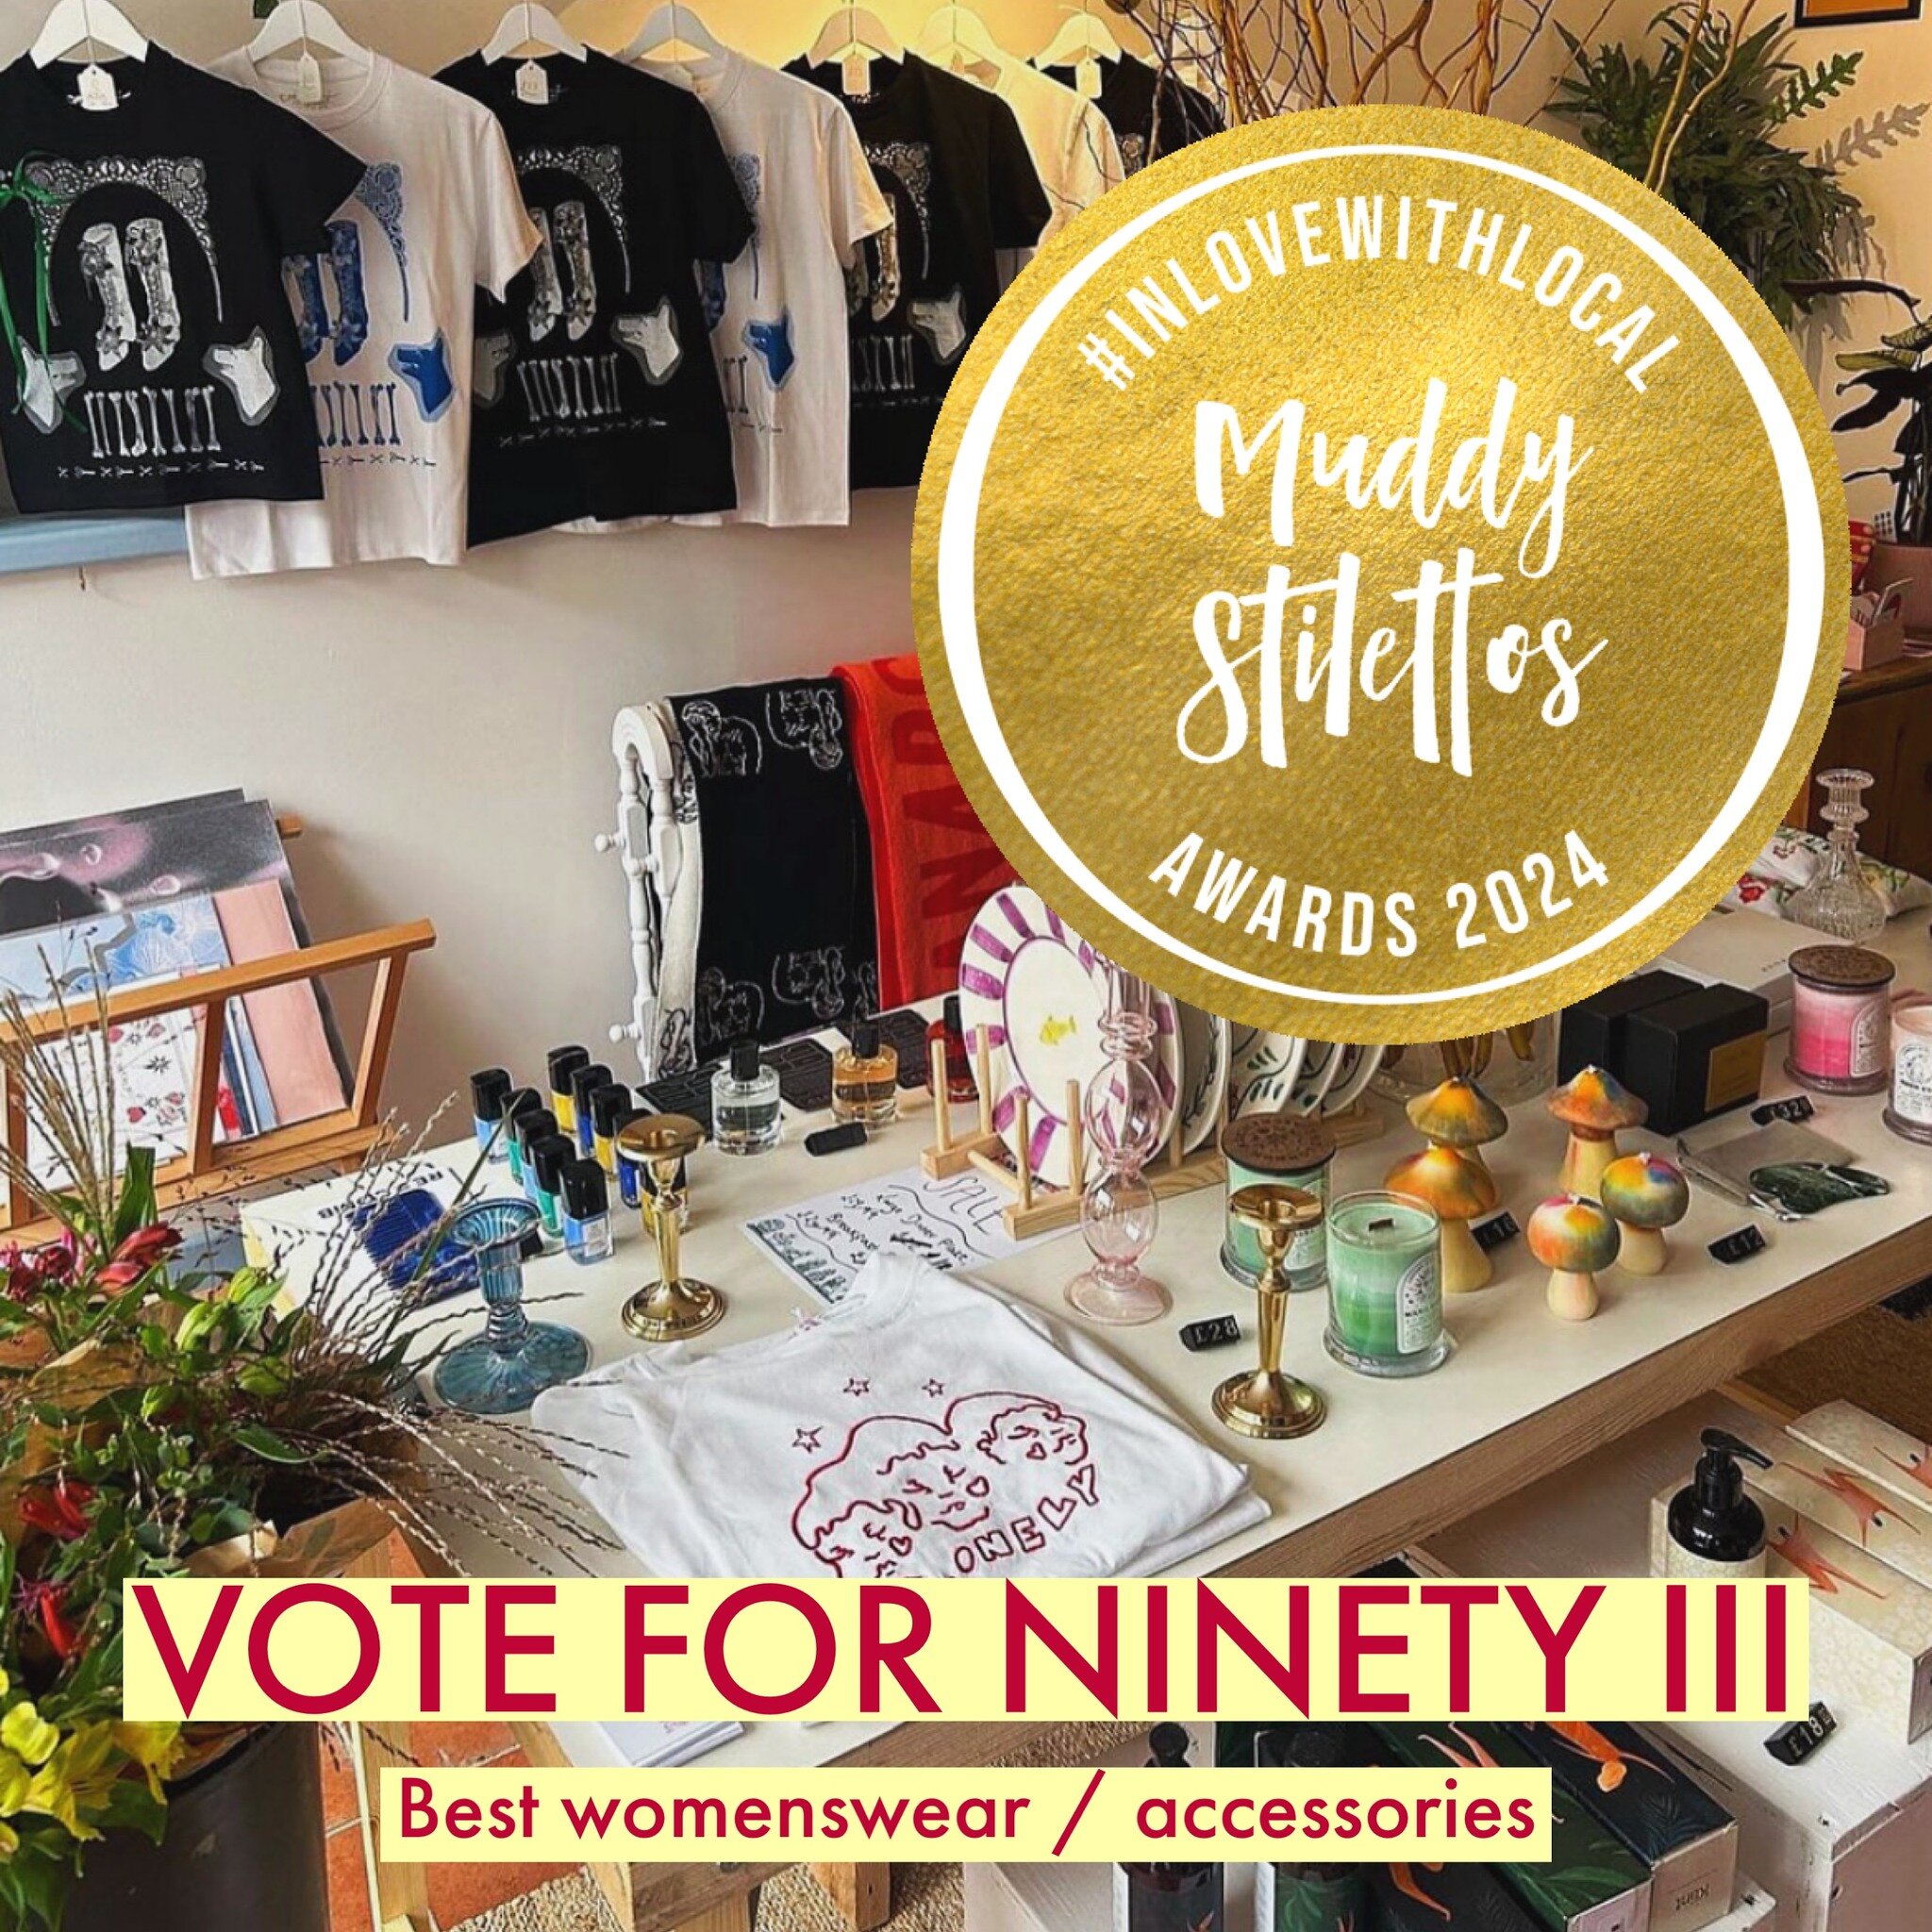 Super chuffed to be in the region final list for the @muddynorfolk awards ~ under the best womenswear / accessories category! 
If you can spare 2 mins to vote for us we would be forever grateful 🫶🏻 link in stories, in the @muddynorfolk bio or at ht